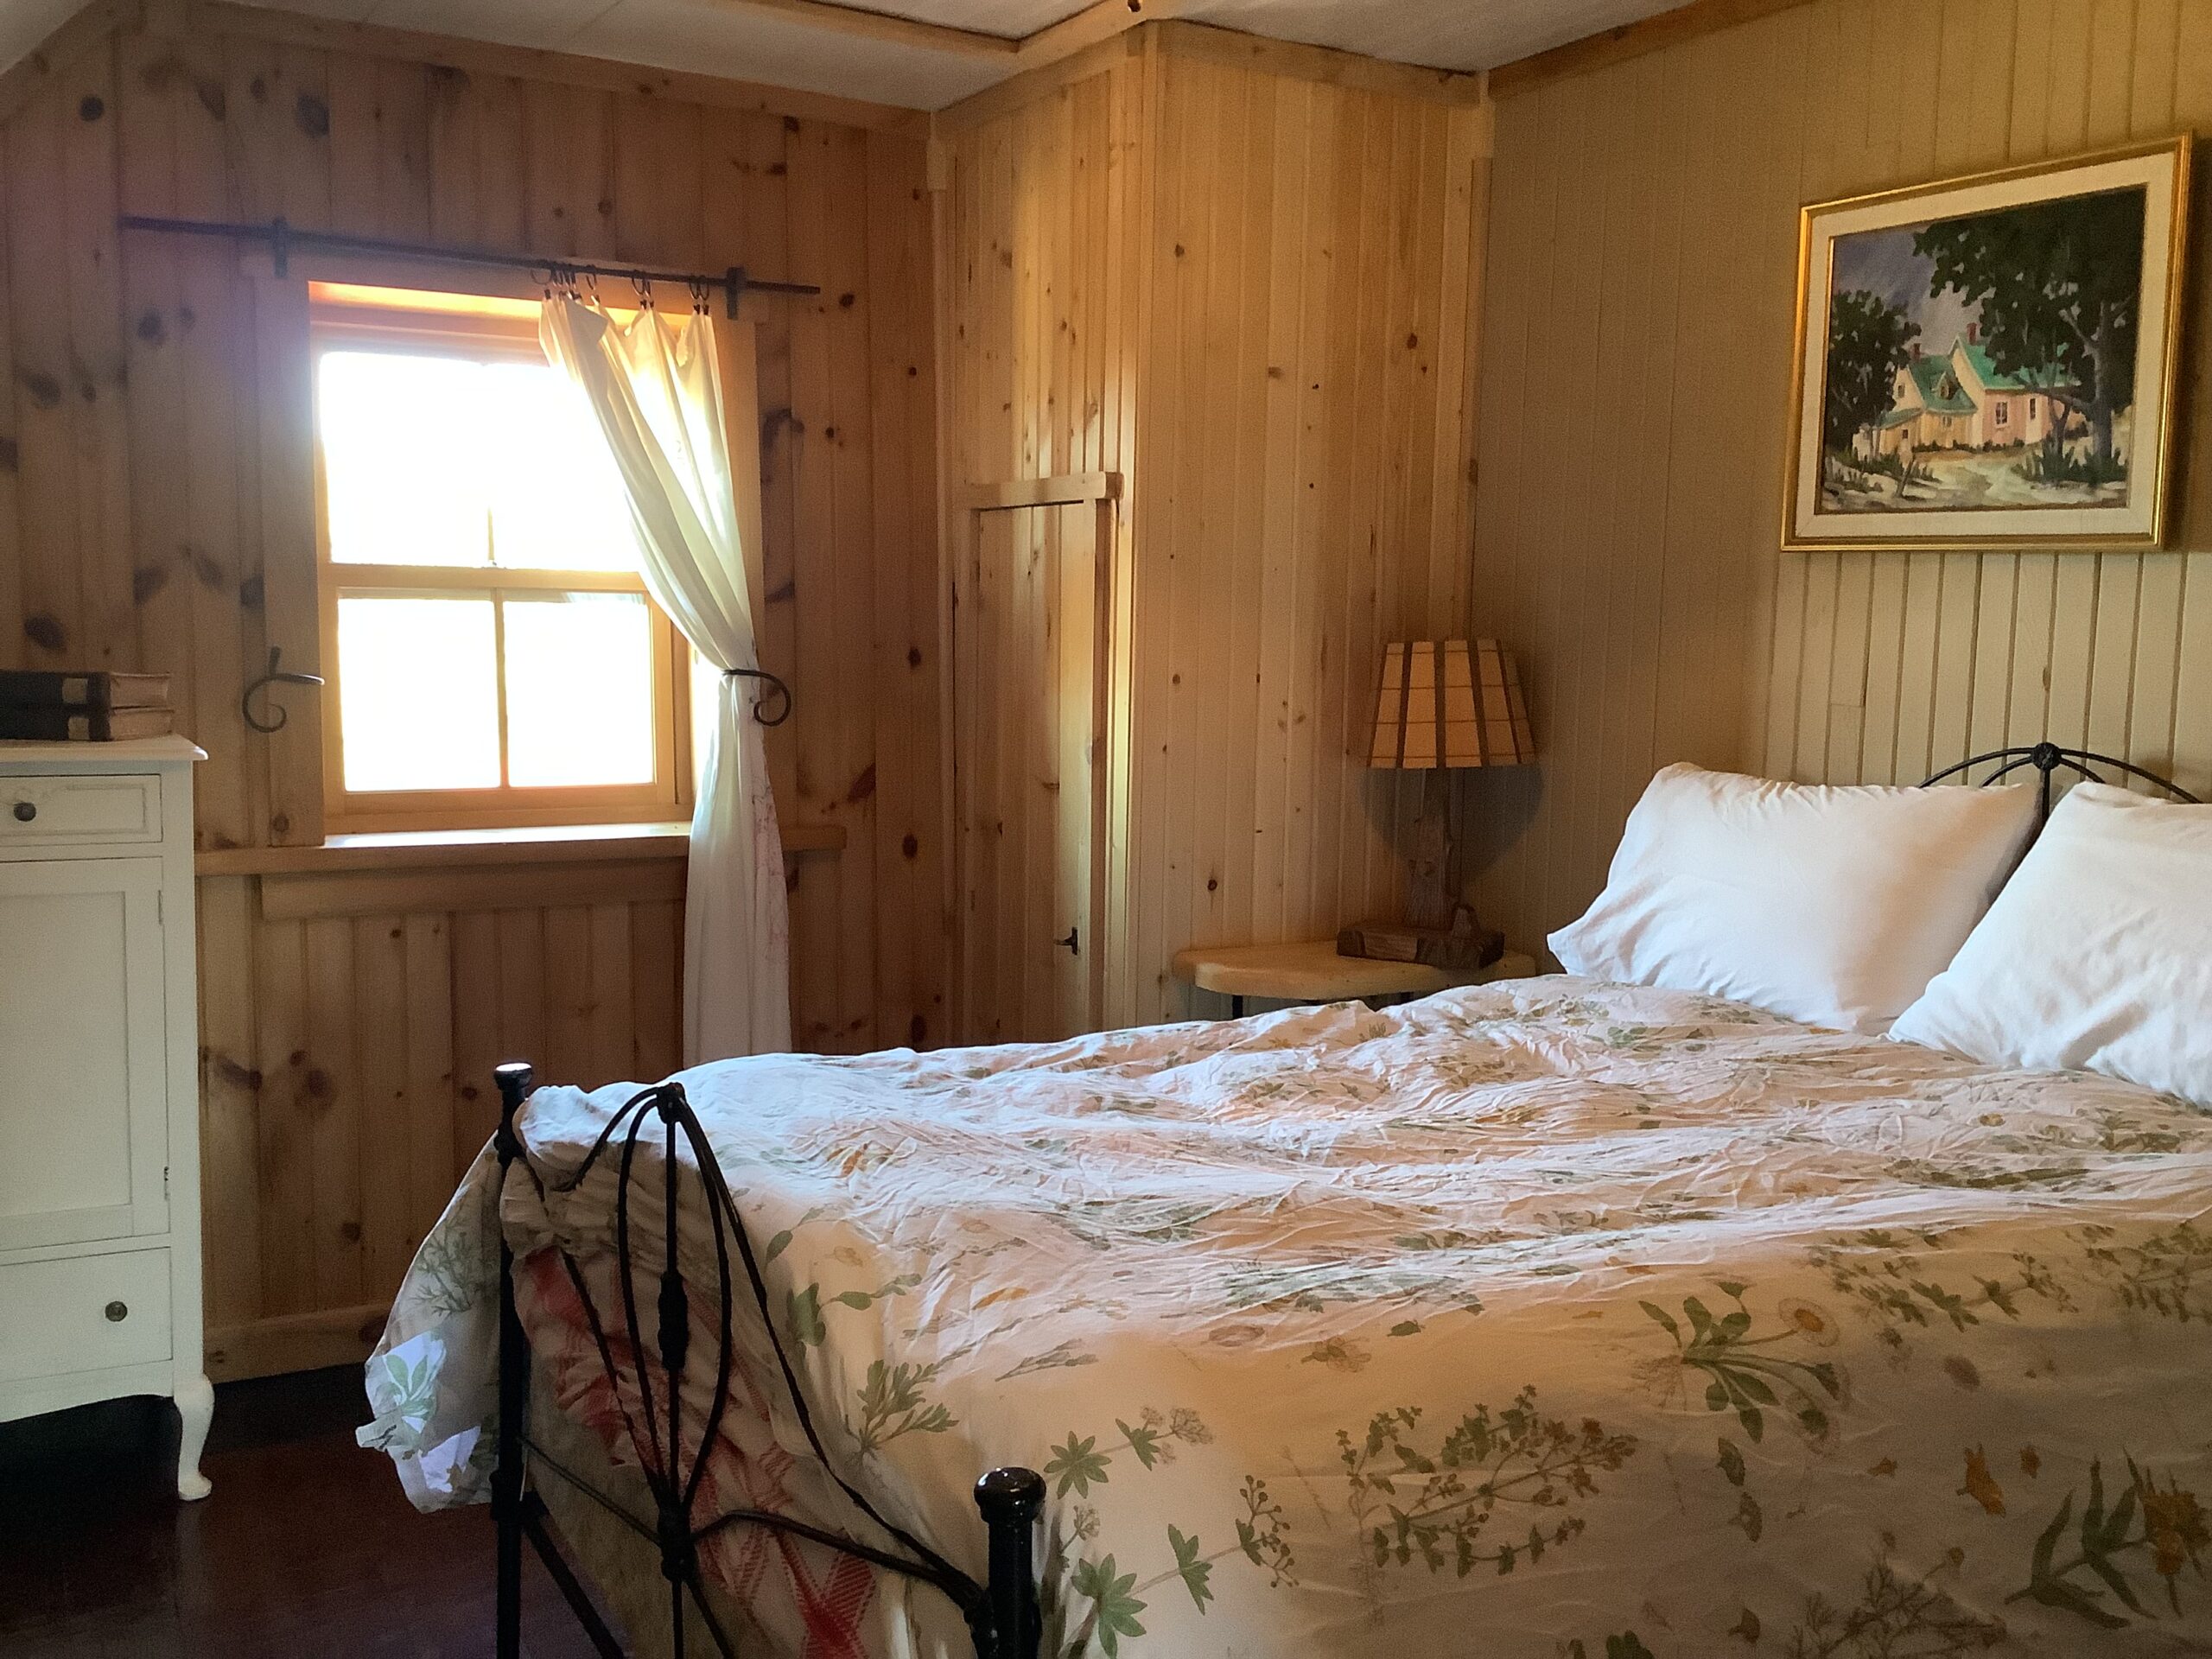 A small bedroom with a window, wood-panelled walls, and a bed with a floral bedspread.